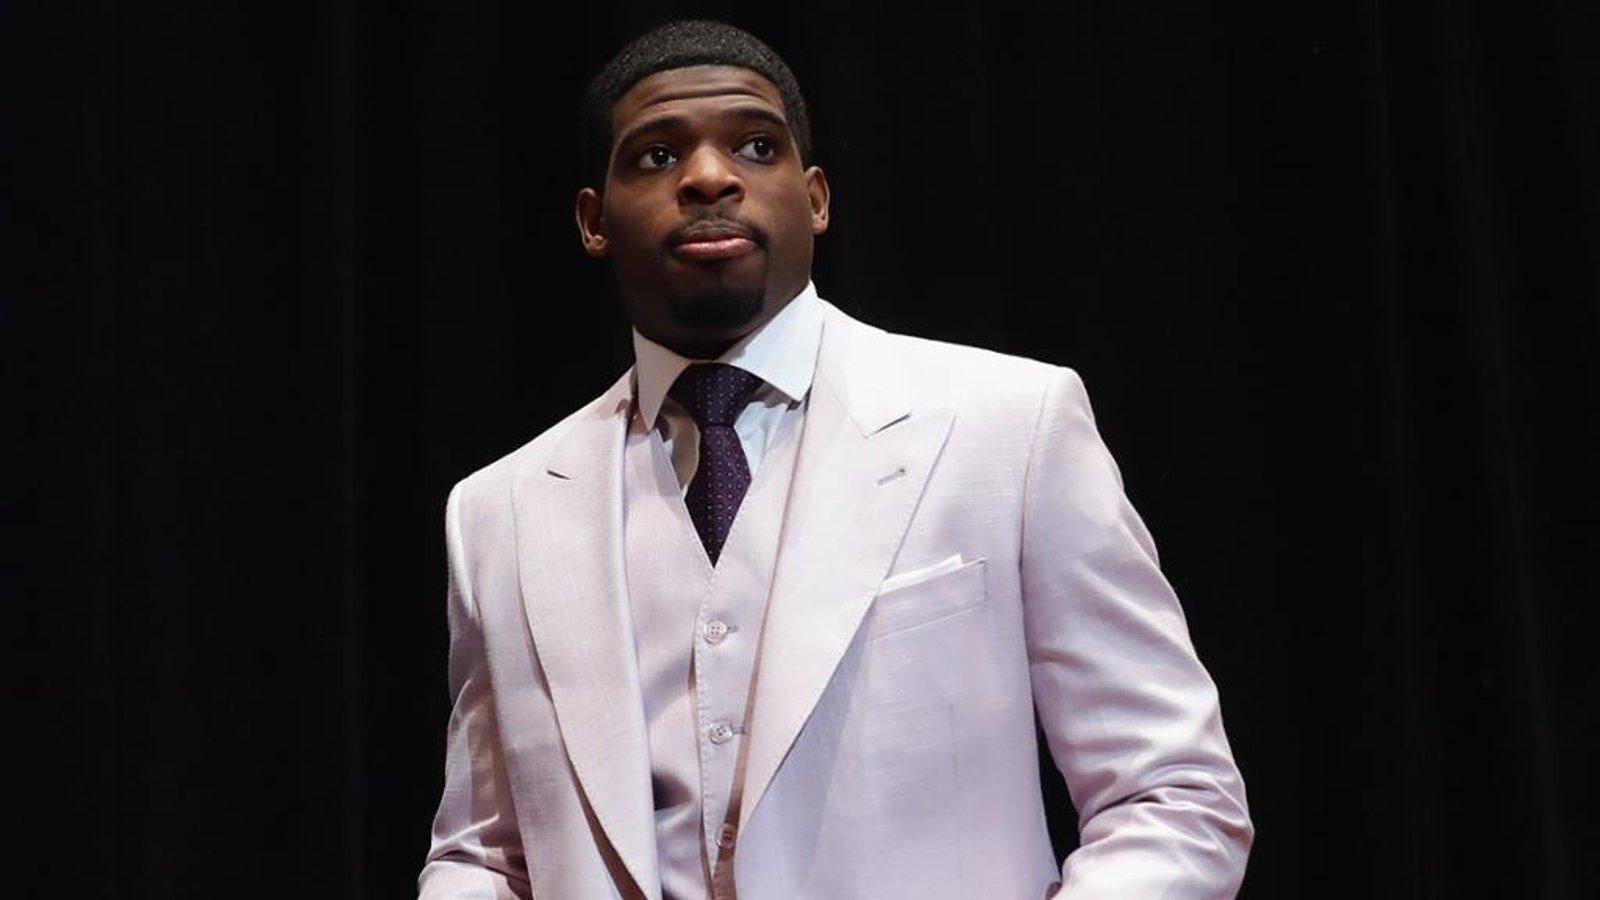 P.K. Subban working on special project during NHL shutdown 